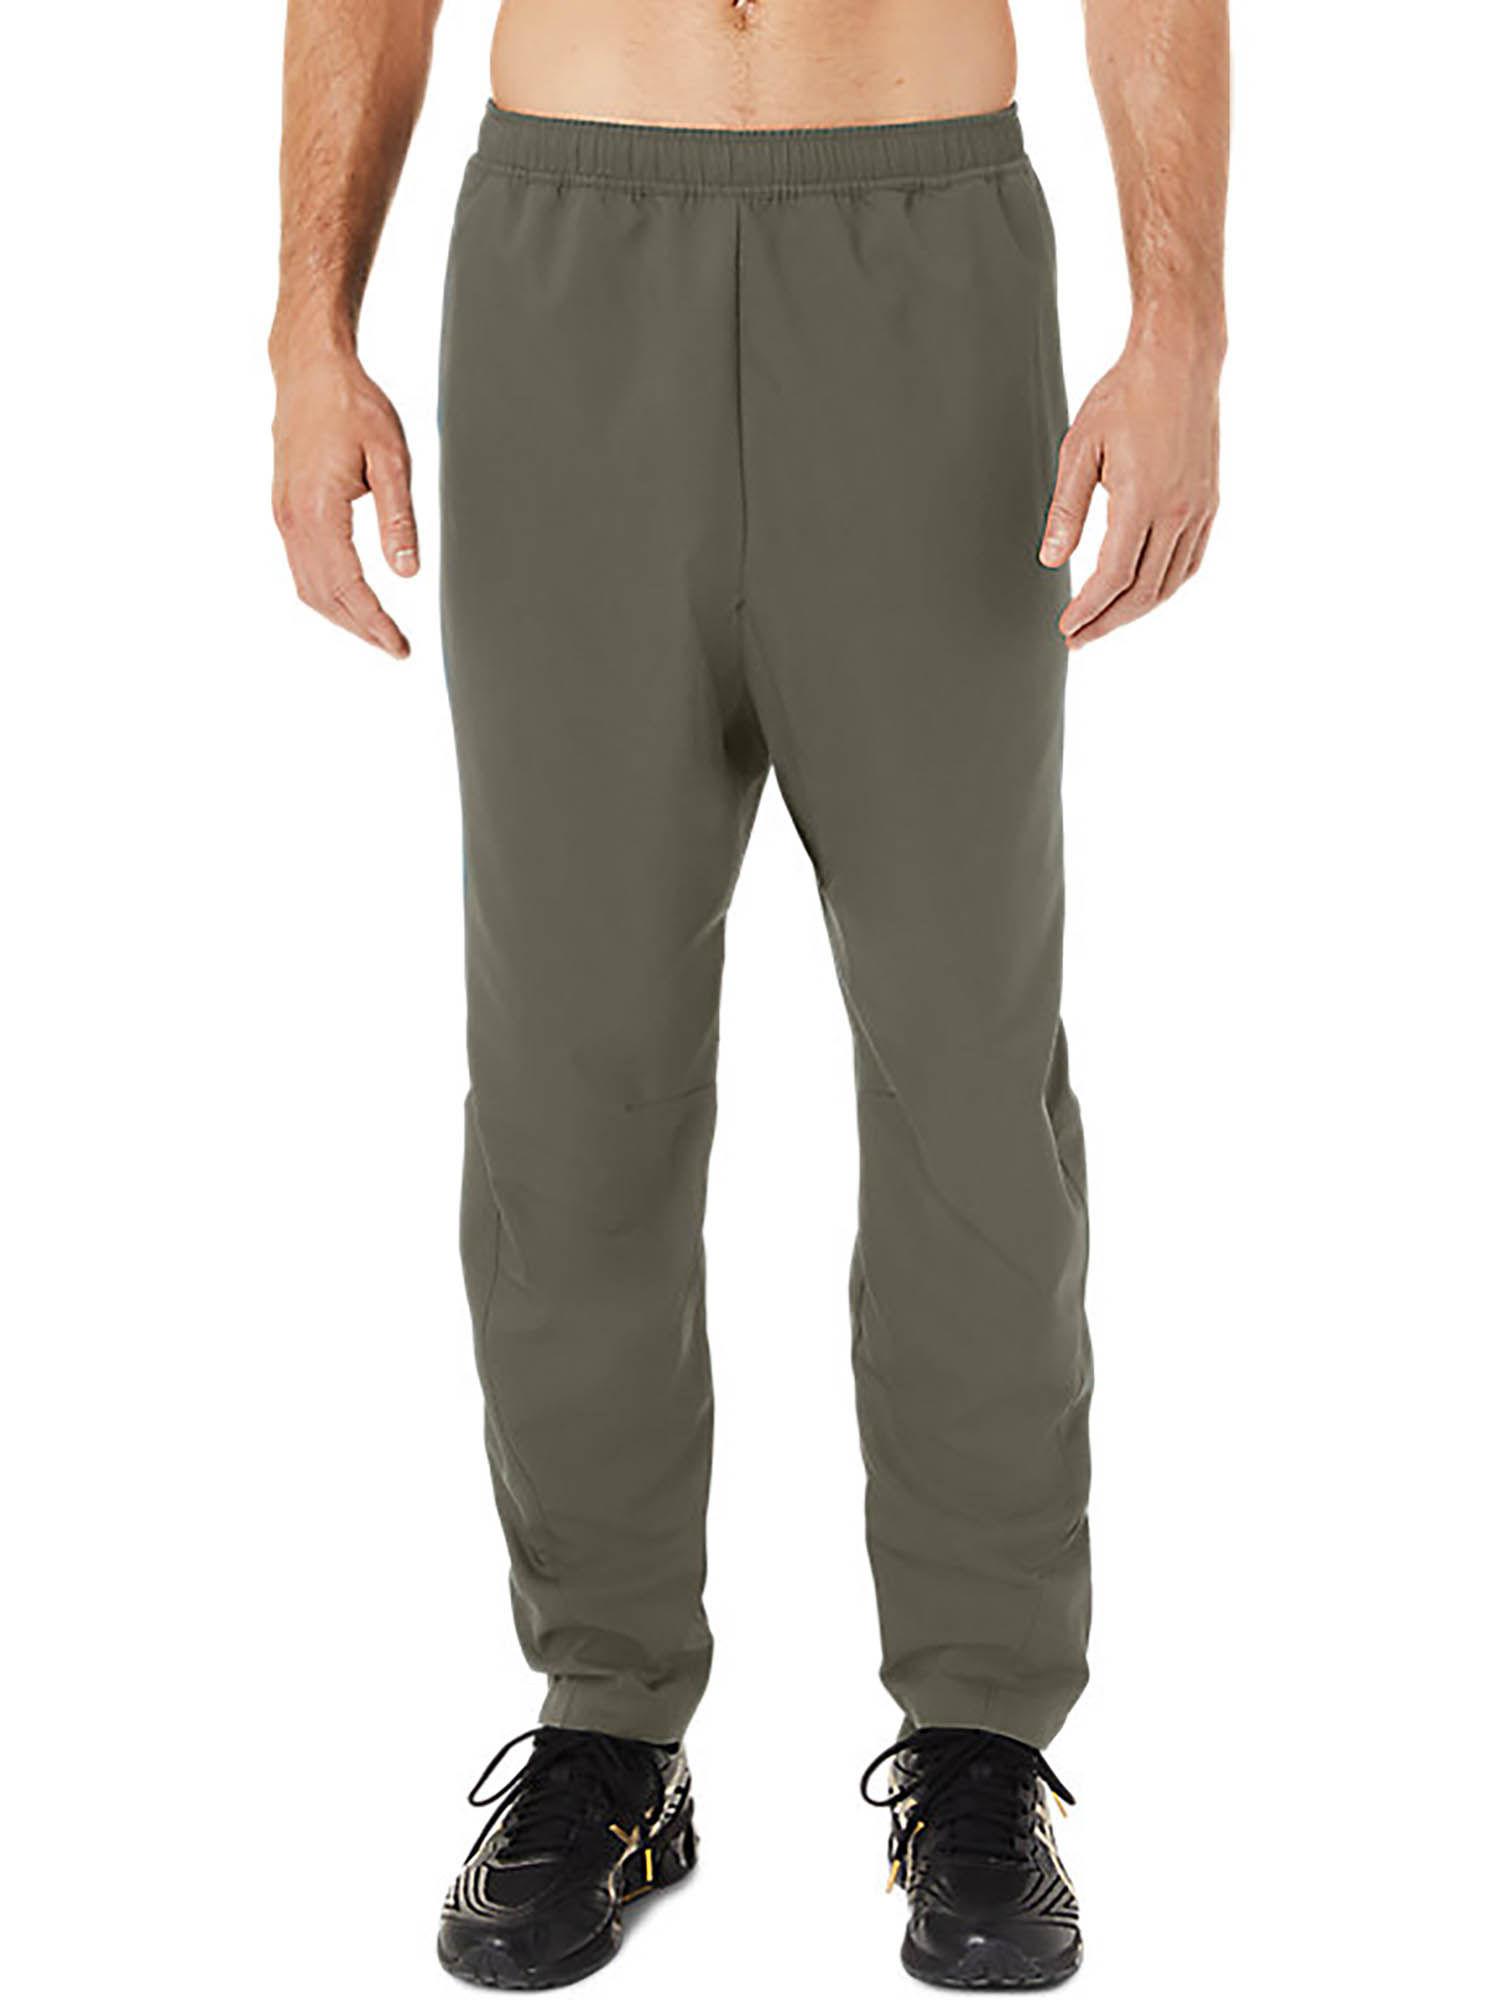 woven-green-mens-track-pant